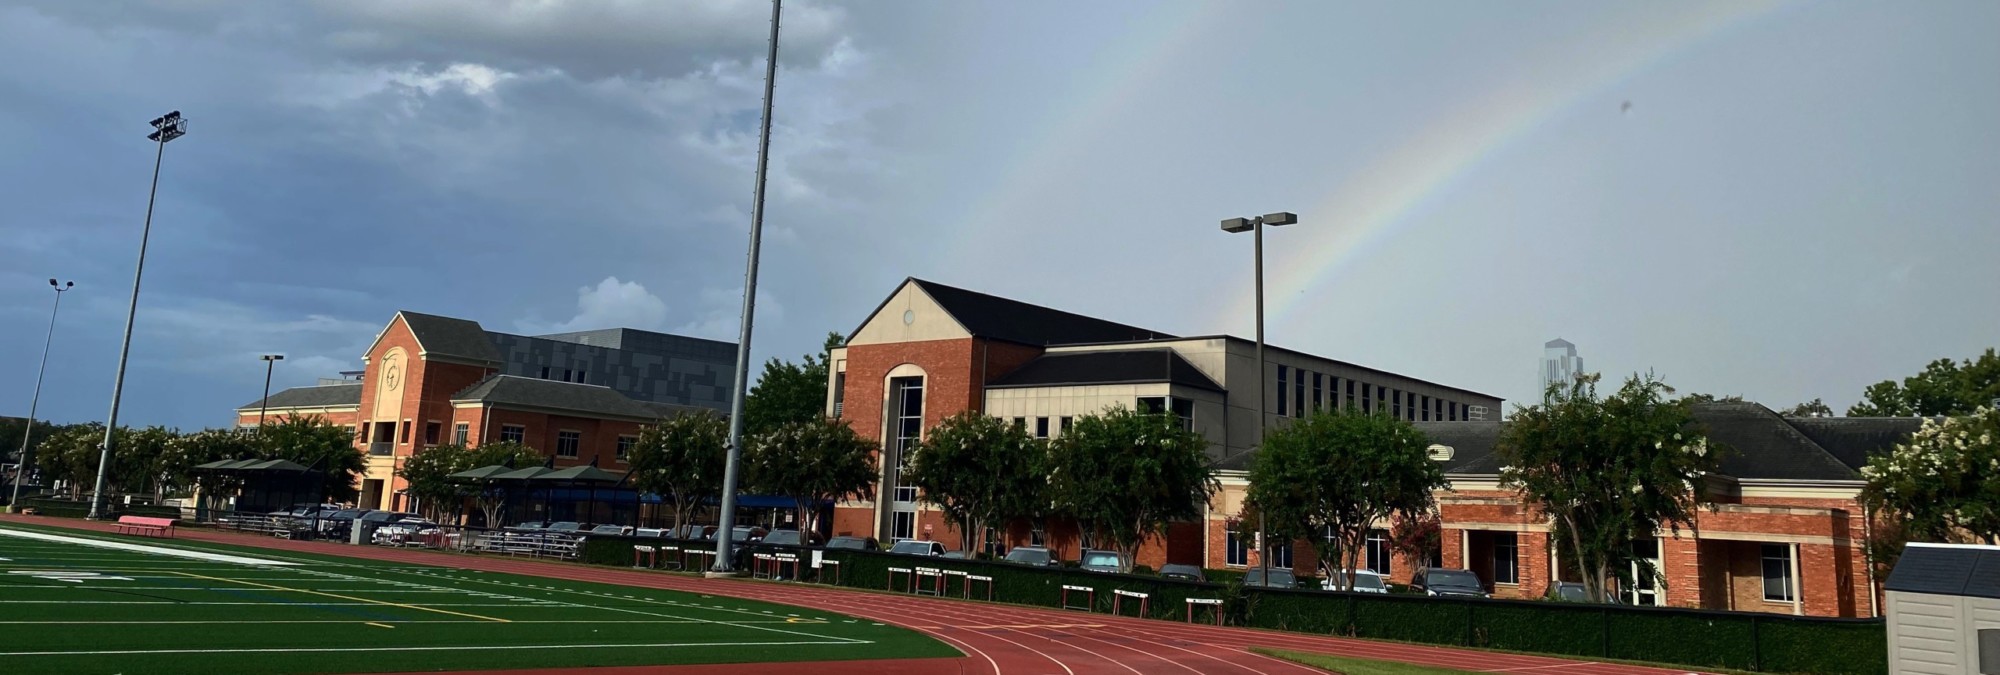 A rainbow appears over a sports field at River Oaks Baptist School